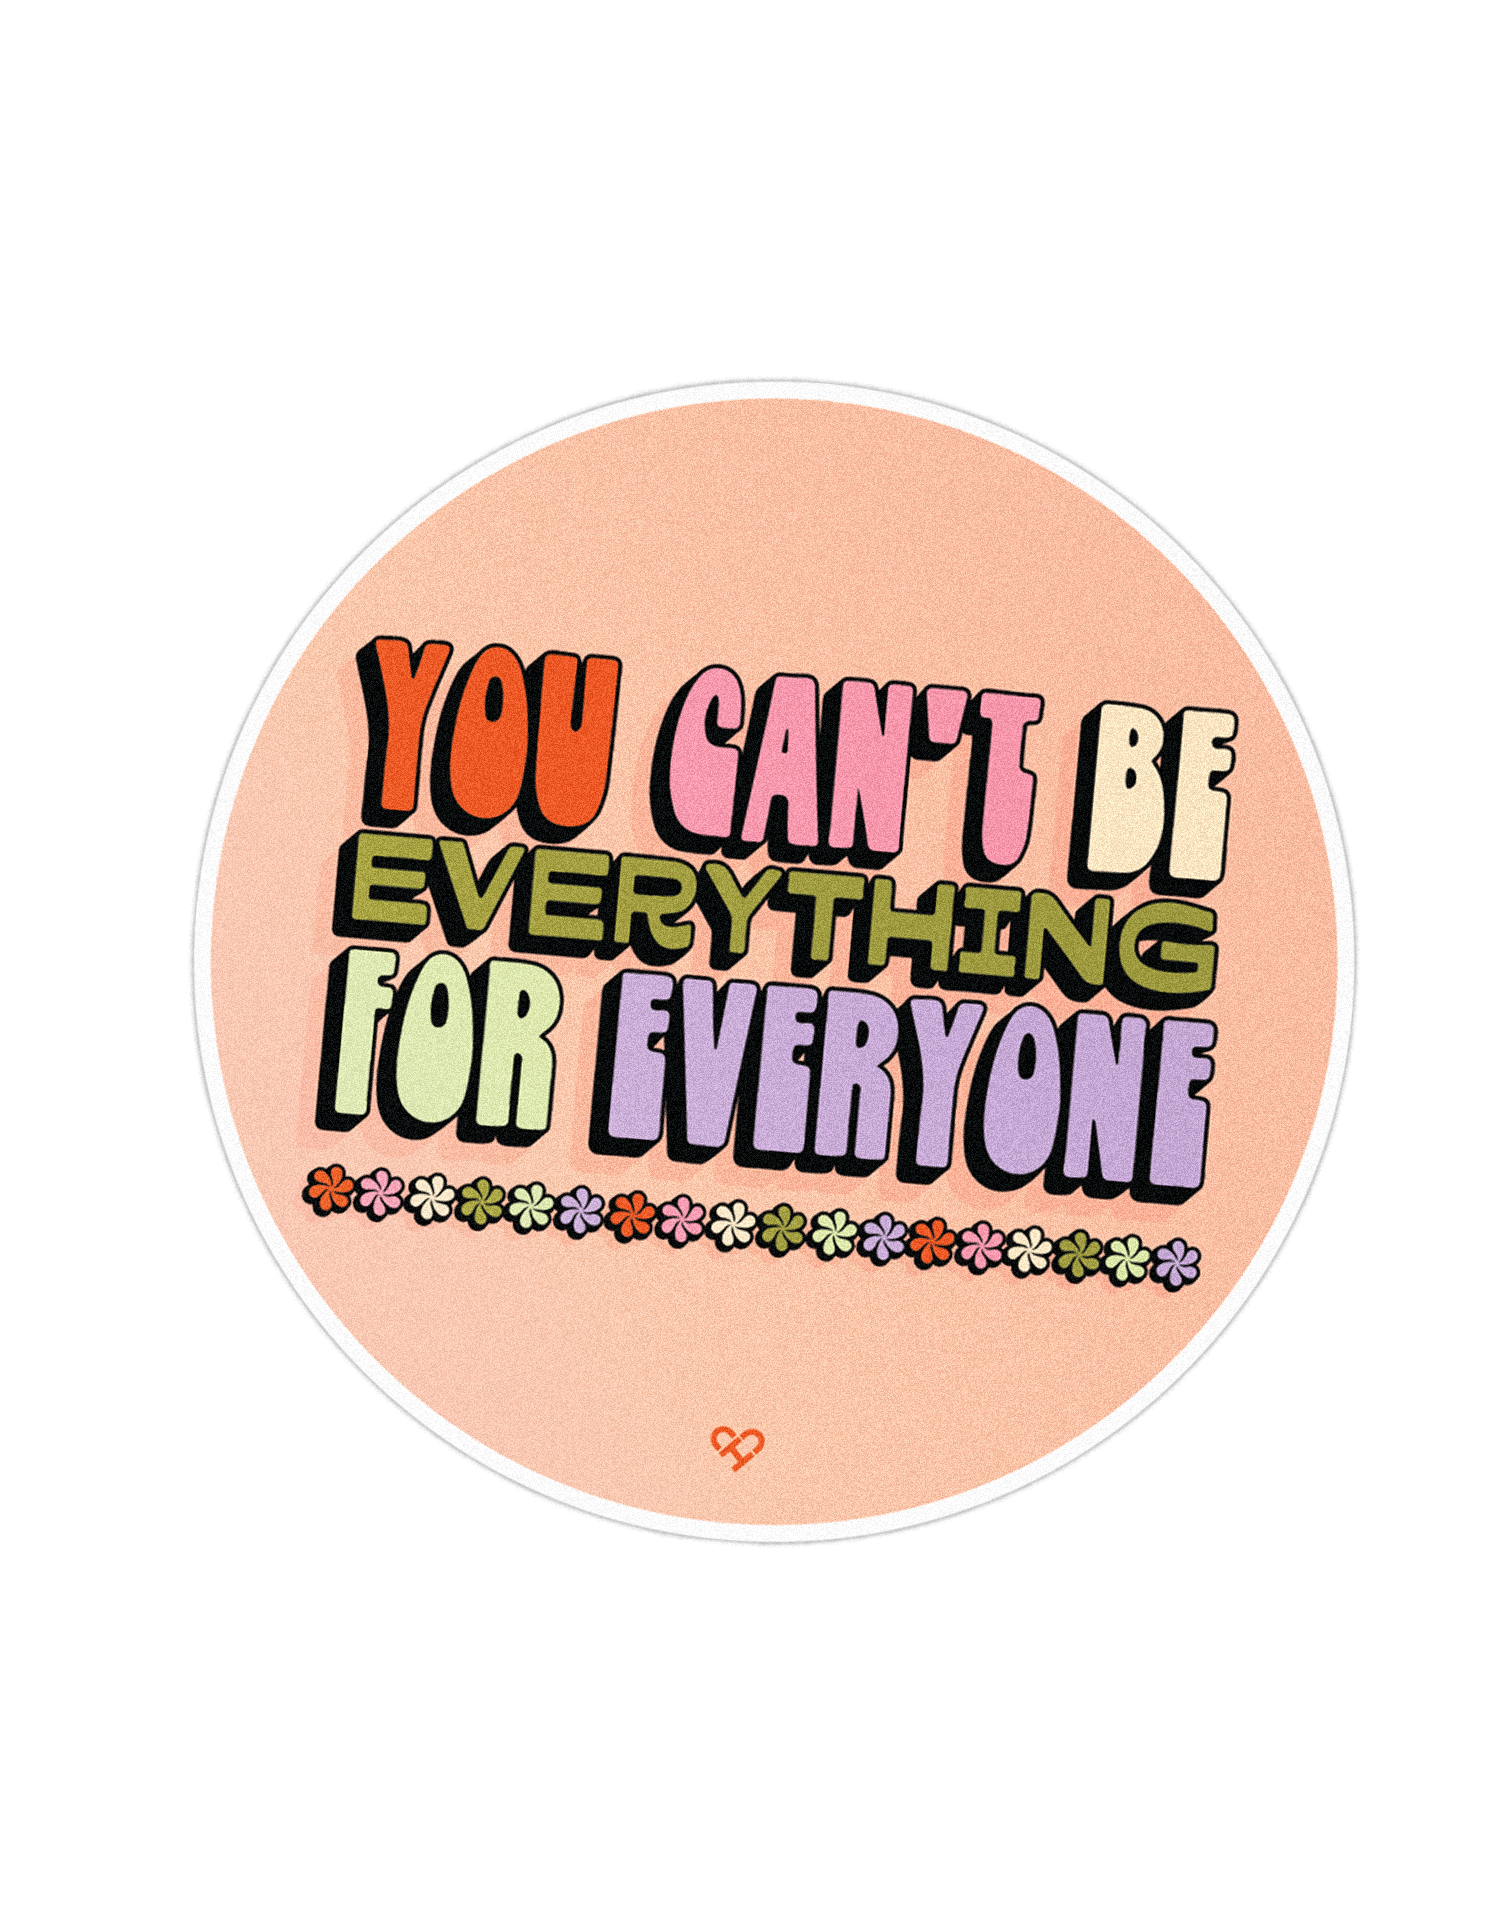 Can_t-be-everything.png